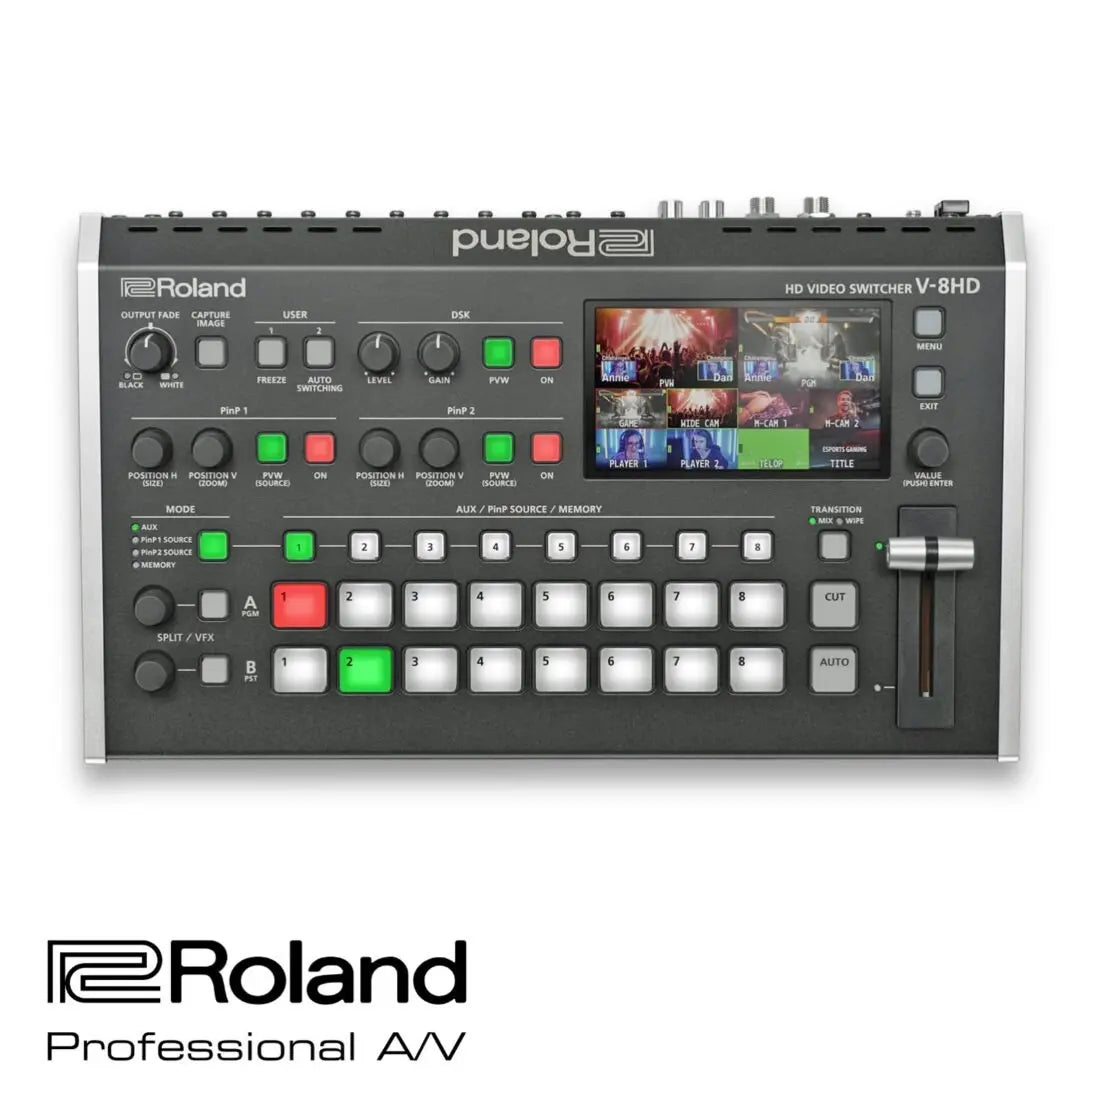 Roland HDMI Video Switcher V-8HD - unlocks a world of creative options for live event switching